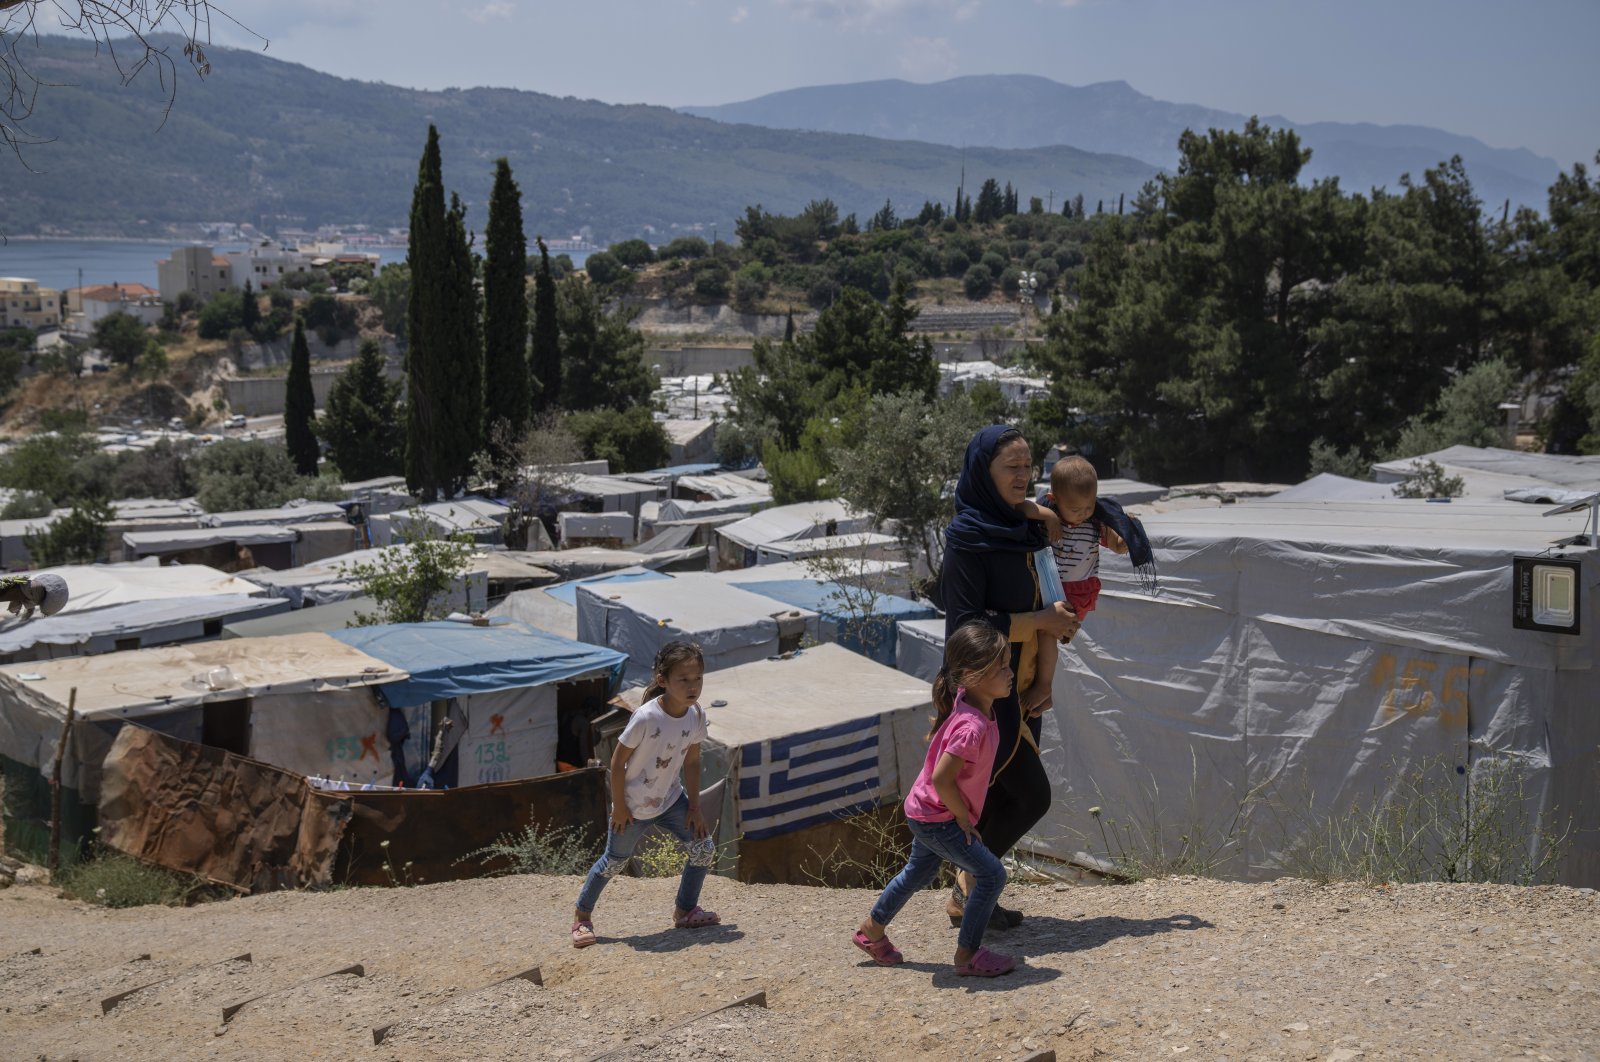 An Afghan woman and her three children walk outside the perimeter of the refugee camp at the port of Vathy on the eastern Aegean island of Samos, Greece, June 11, 2021. (AP Photo)